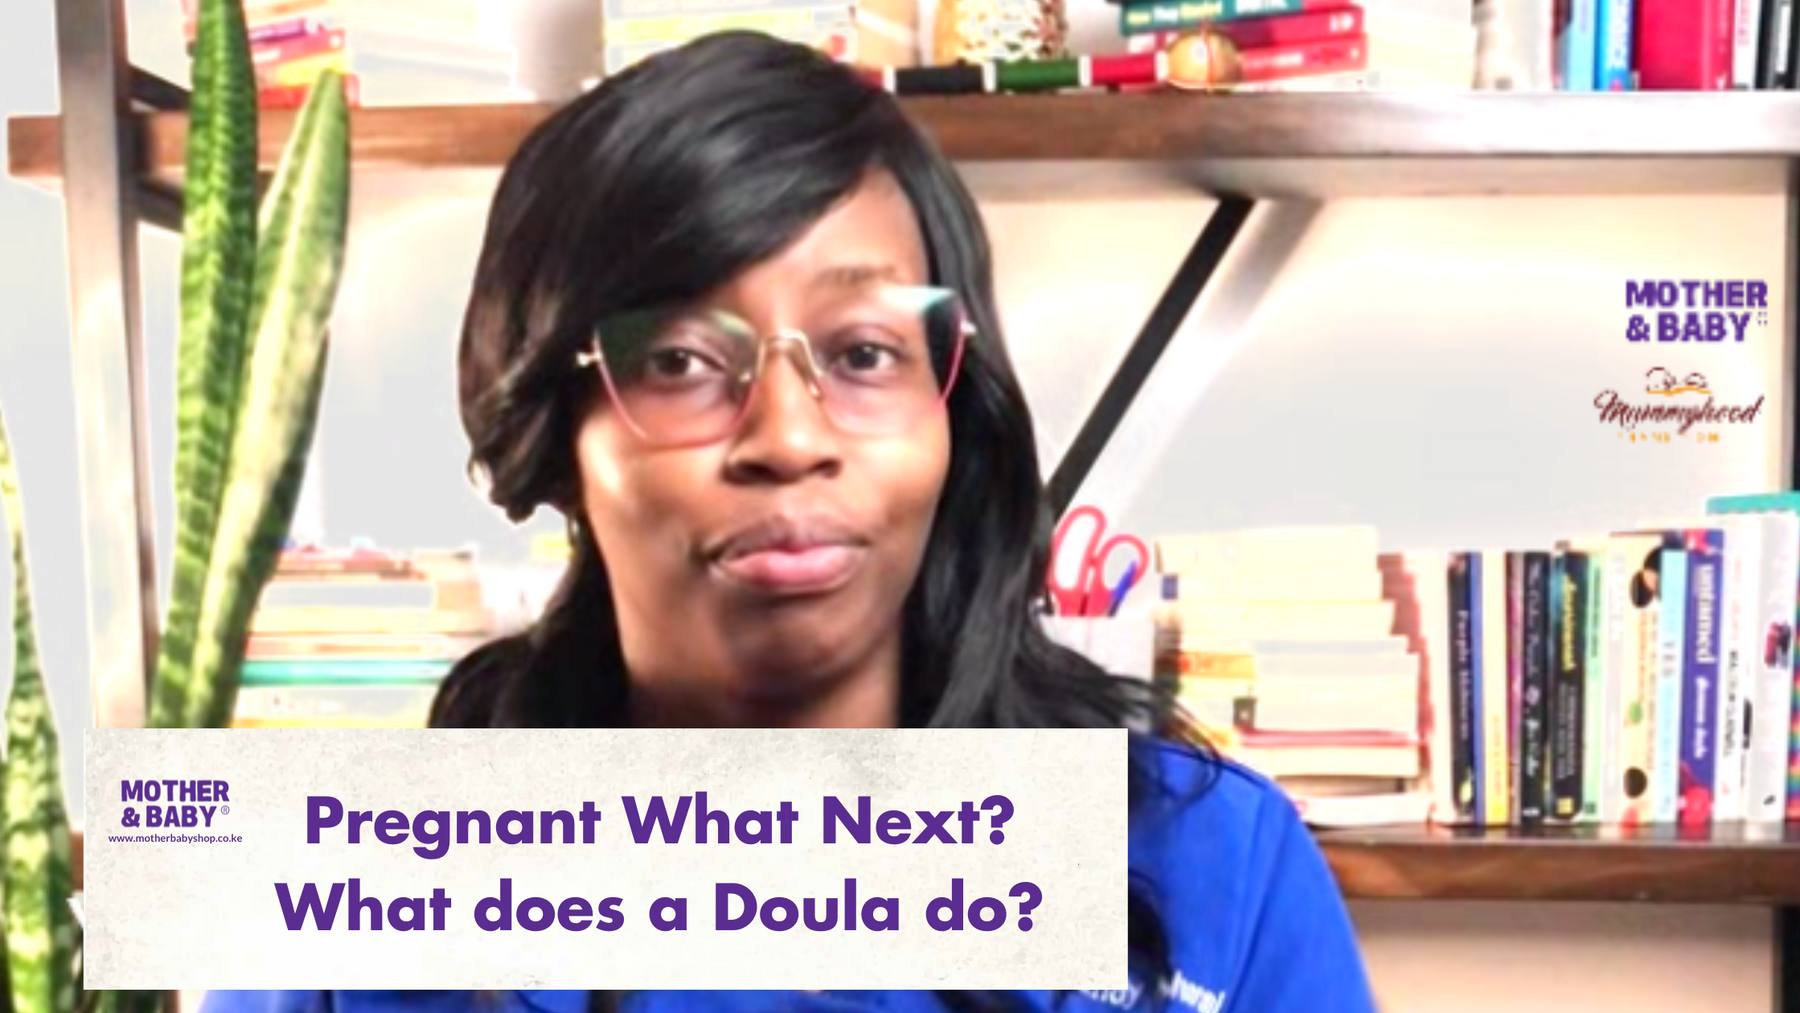 What does a Doula do?